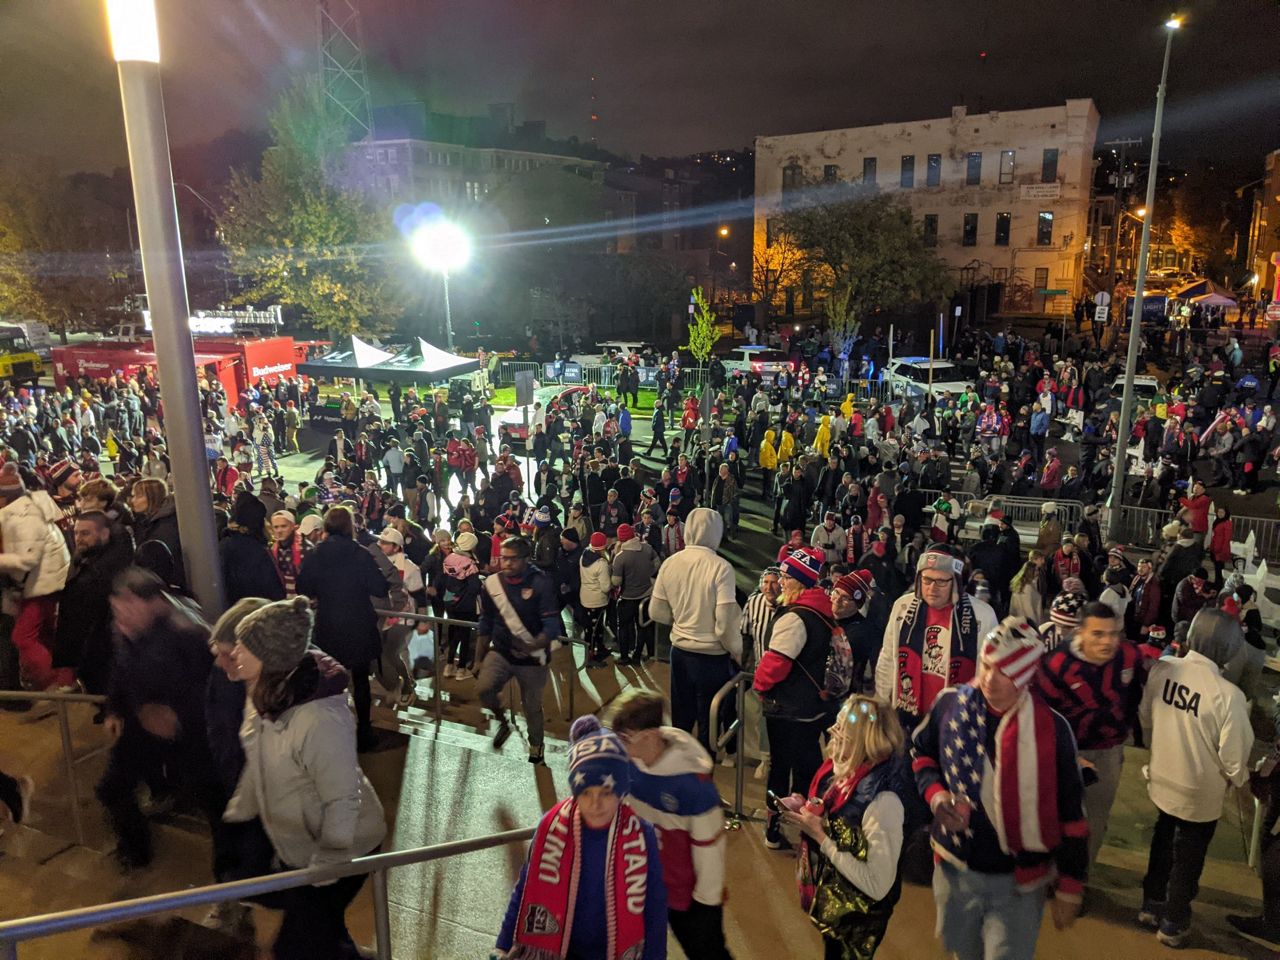 Fans crowd outside TQL Stadium in Cincinnati, Ohio, on Nov. 12, 2021. Fans marched to the stadium, many of them joining after spending all afternoon enjoying the areas bars and restaurants (Todd Smith/American Outlaws)